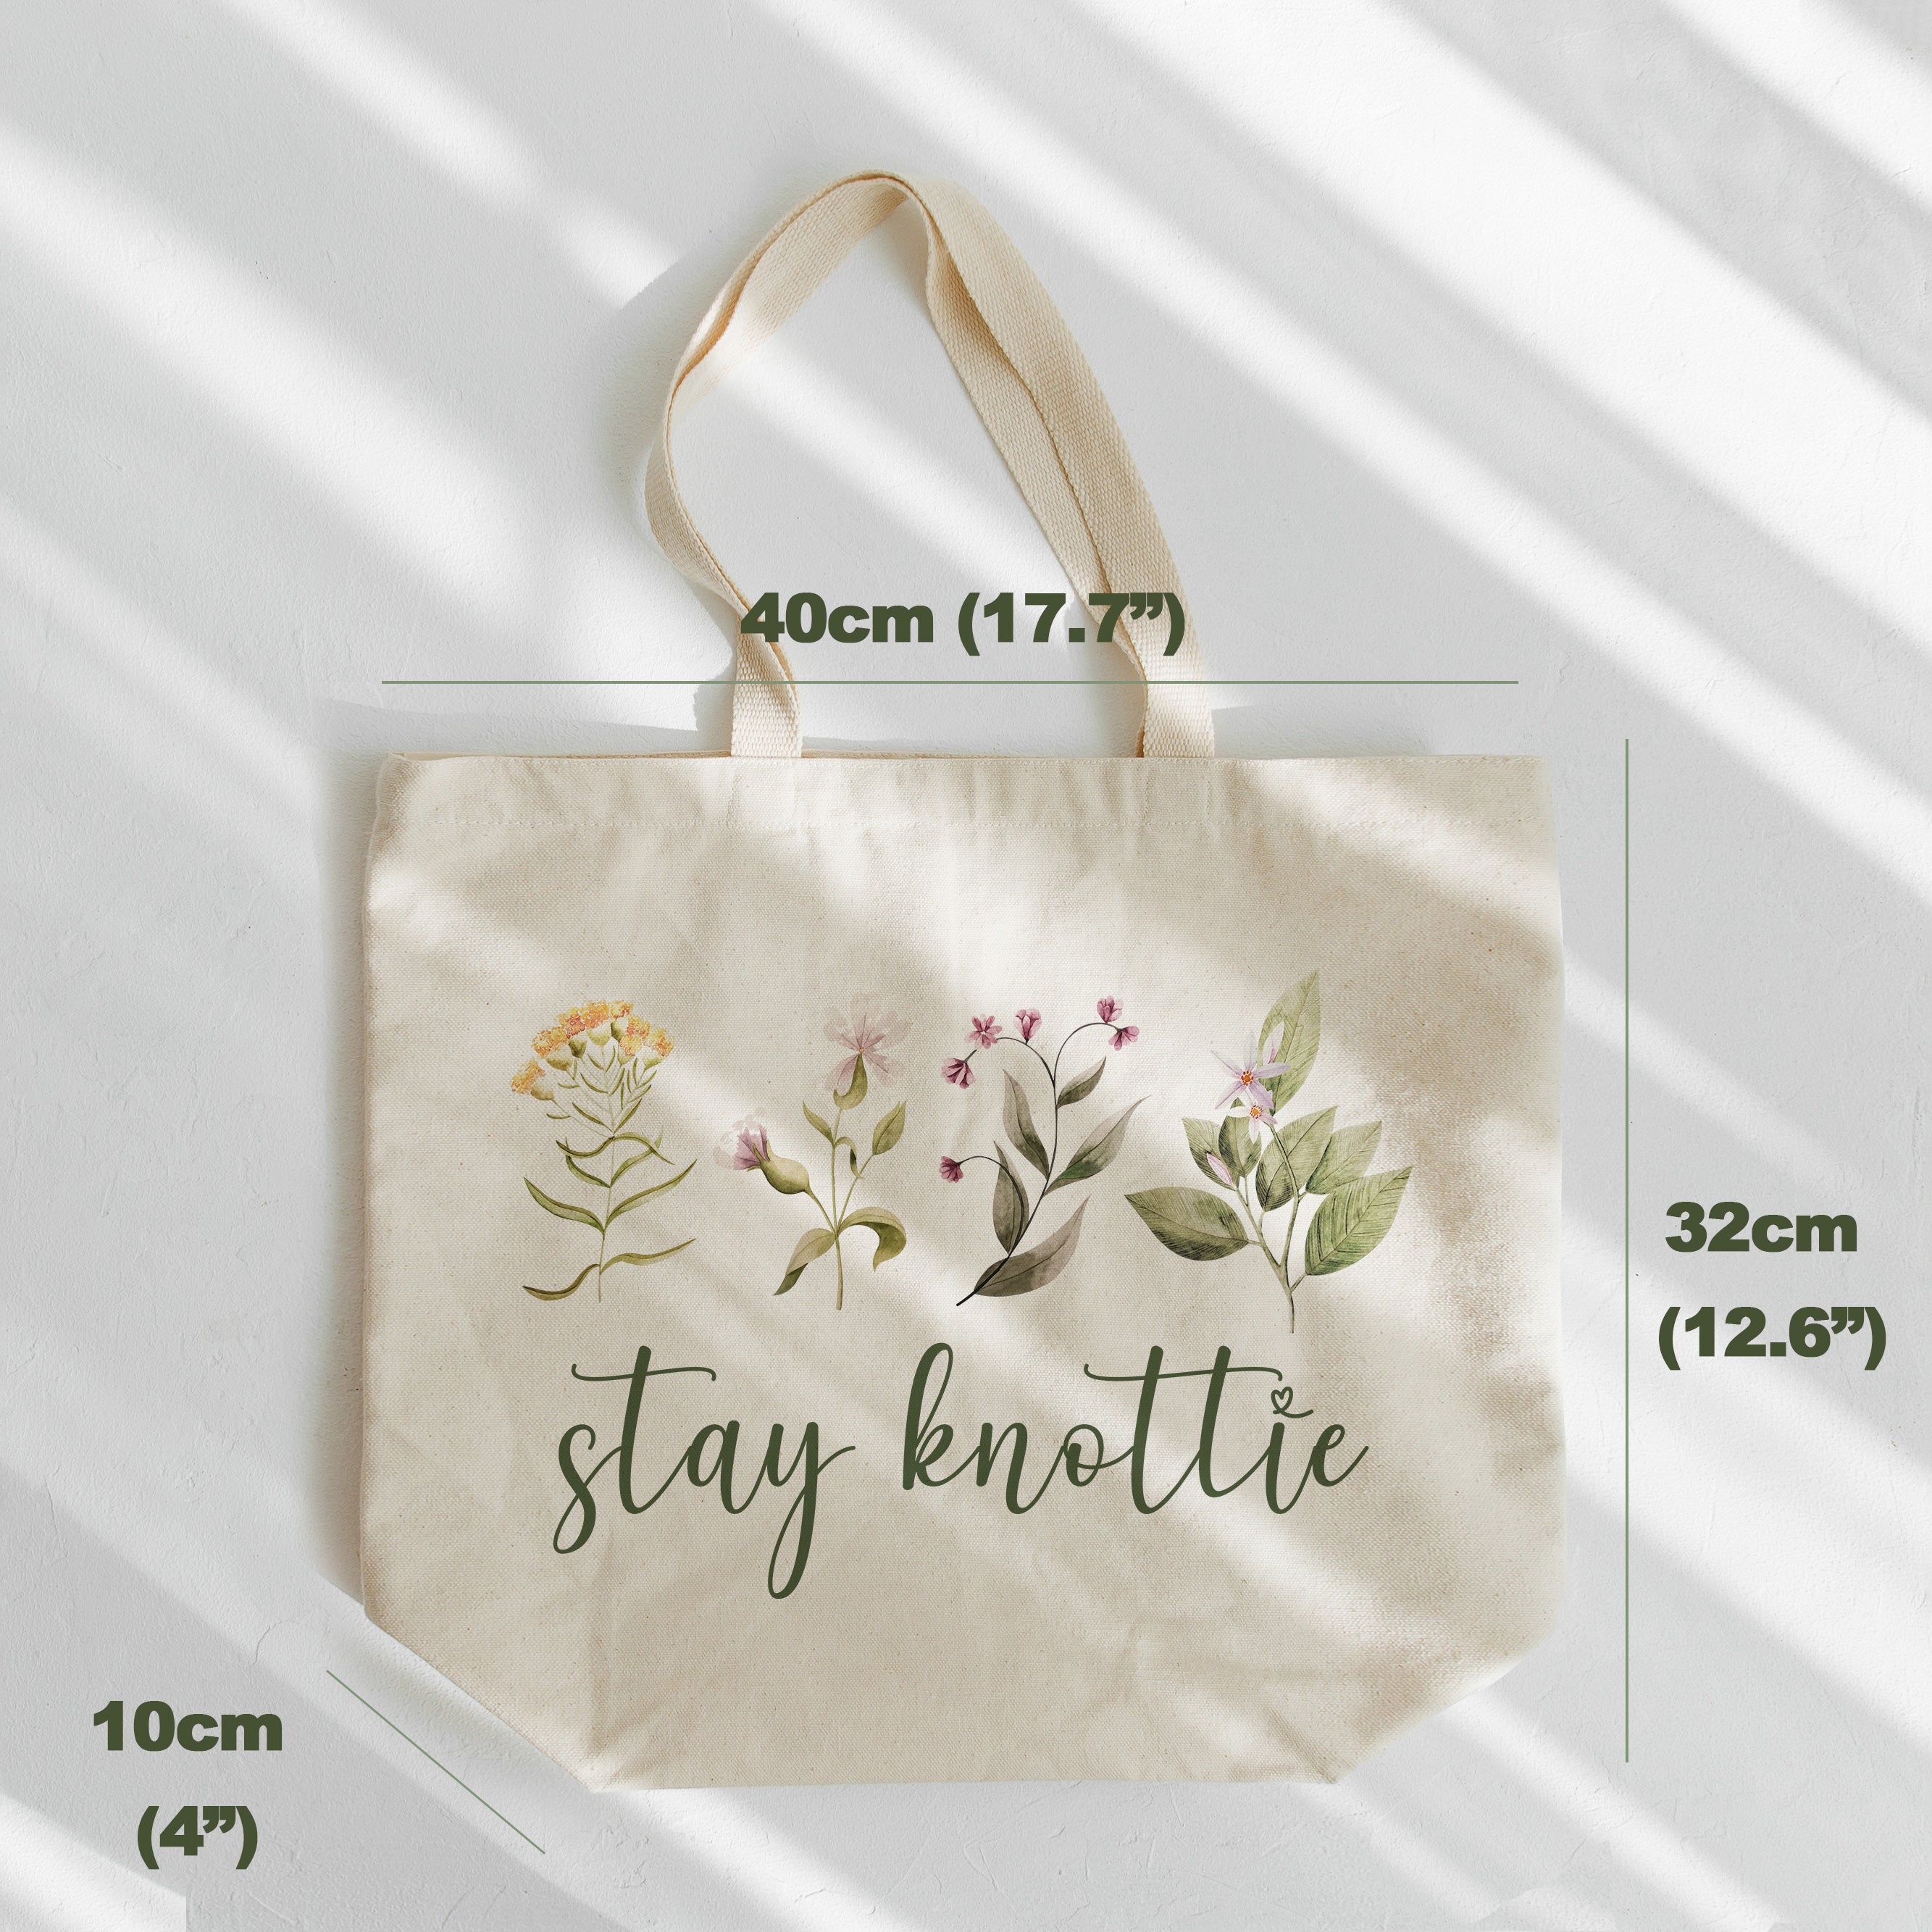 Stay Knottie Tote Bag